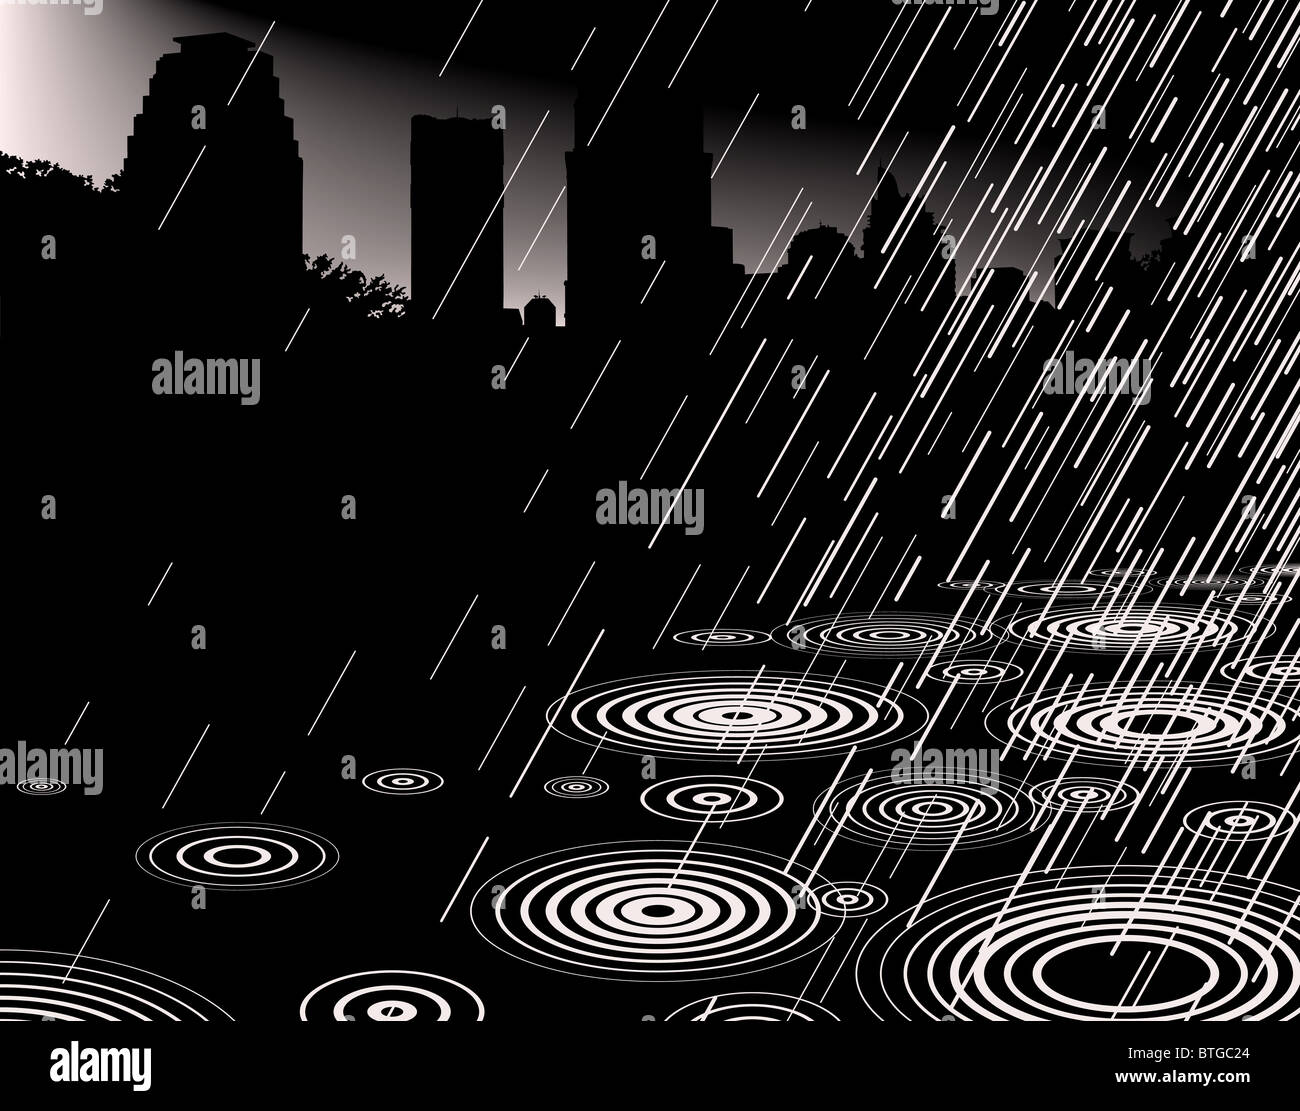 Illustration of rain with a city skyline and copy-space Stock Photo